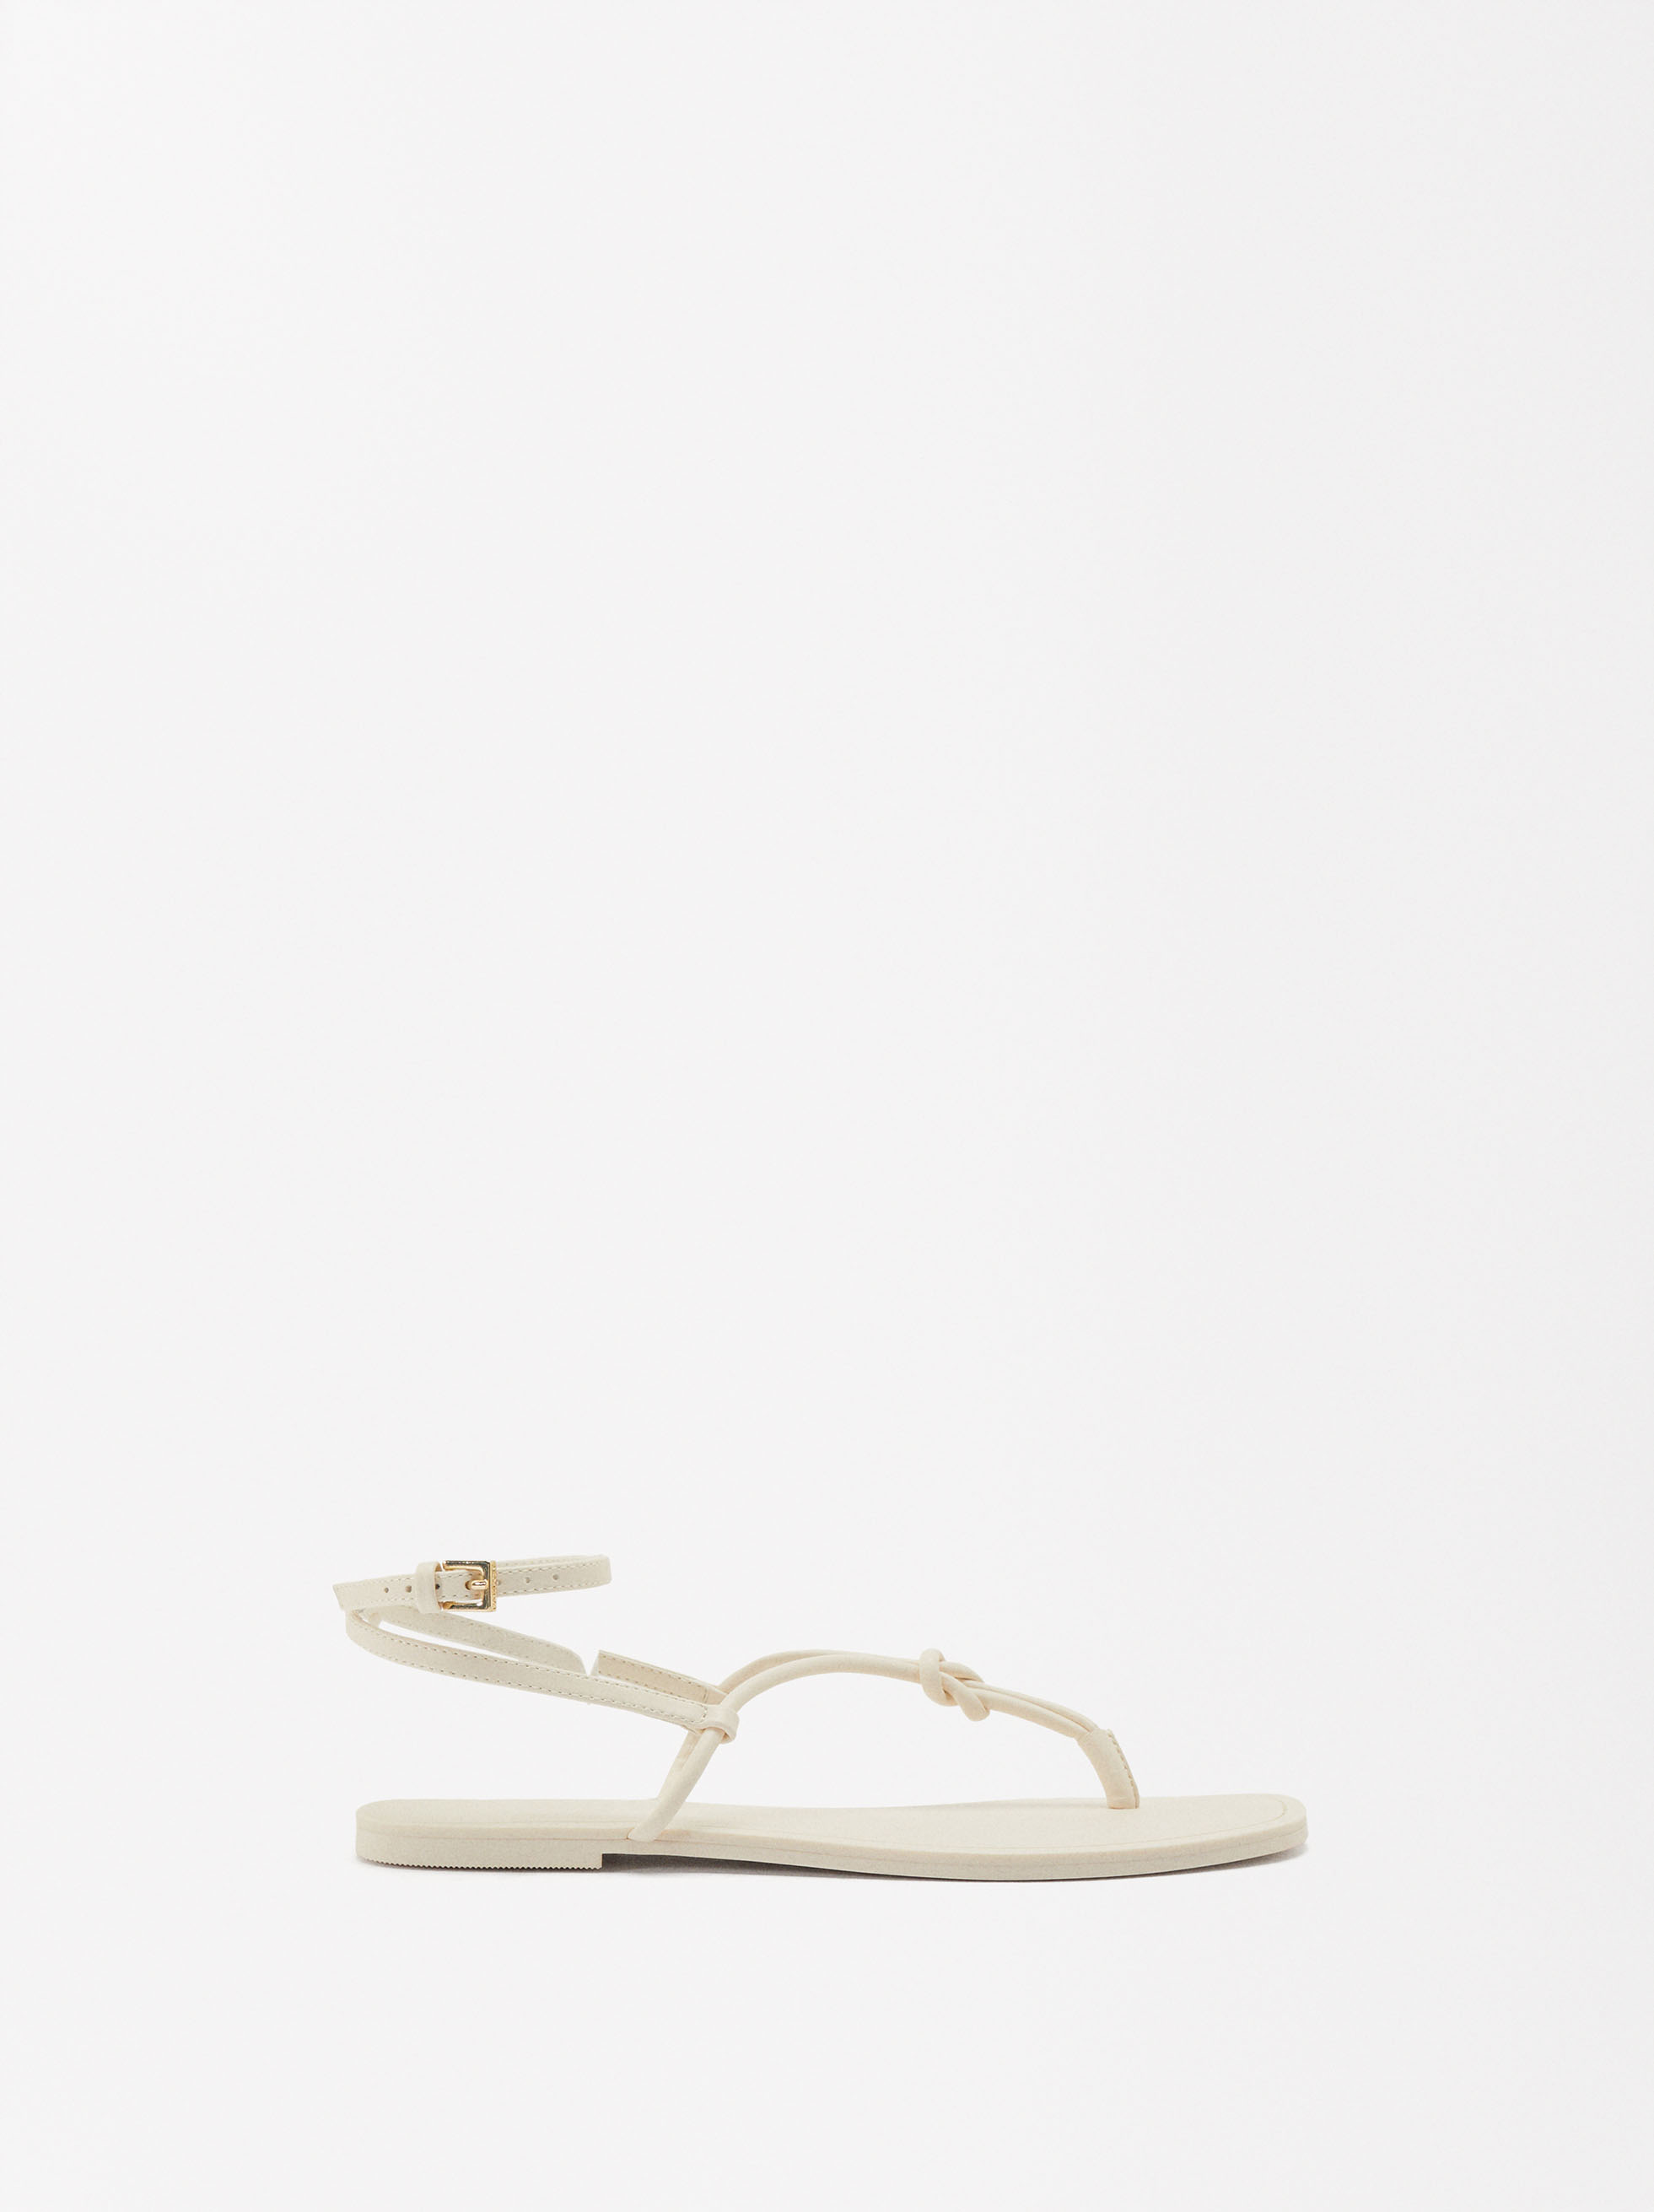 Flat Strappy Sandals image number 1.0